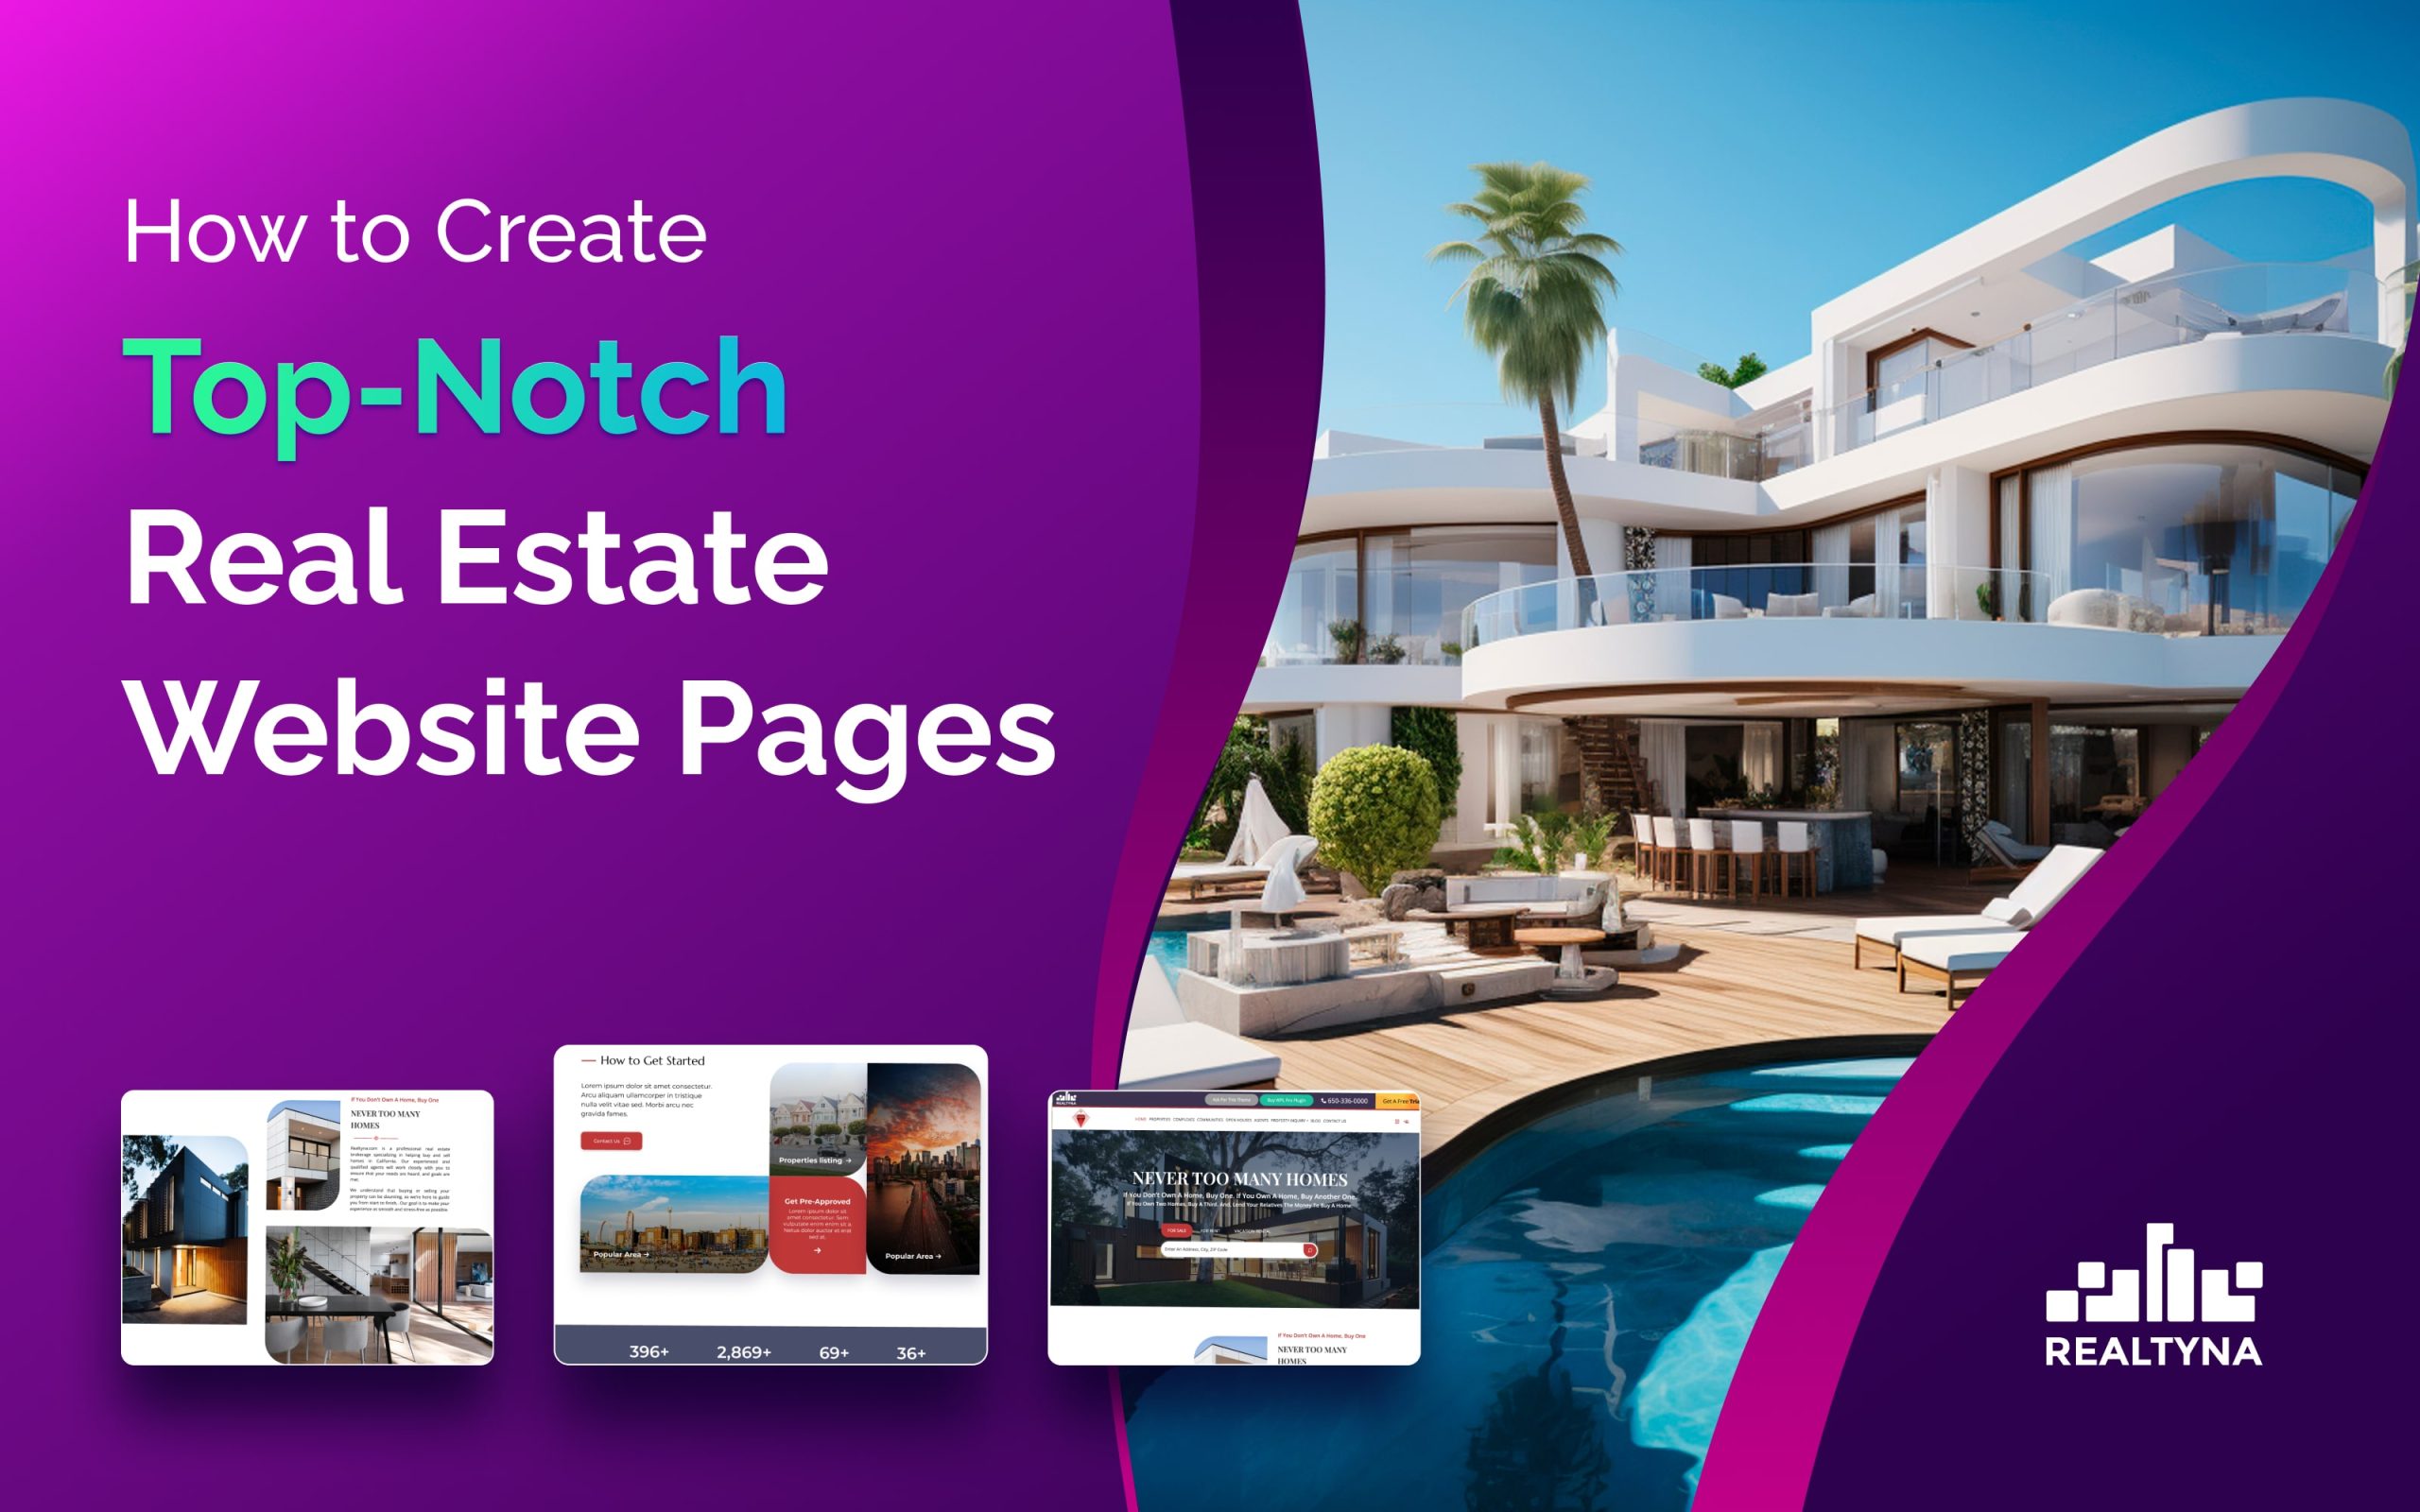 How to Create Top-Notch Real Estate Website Pages